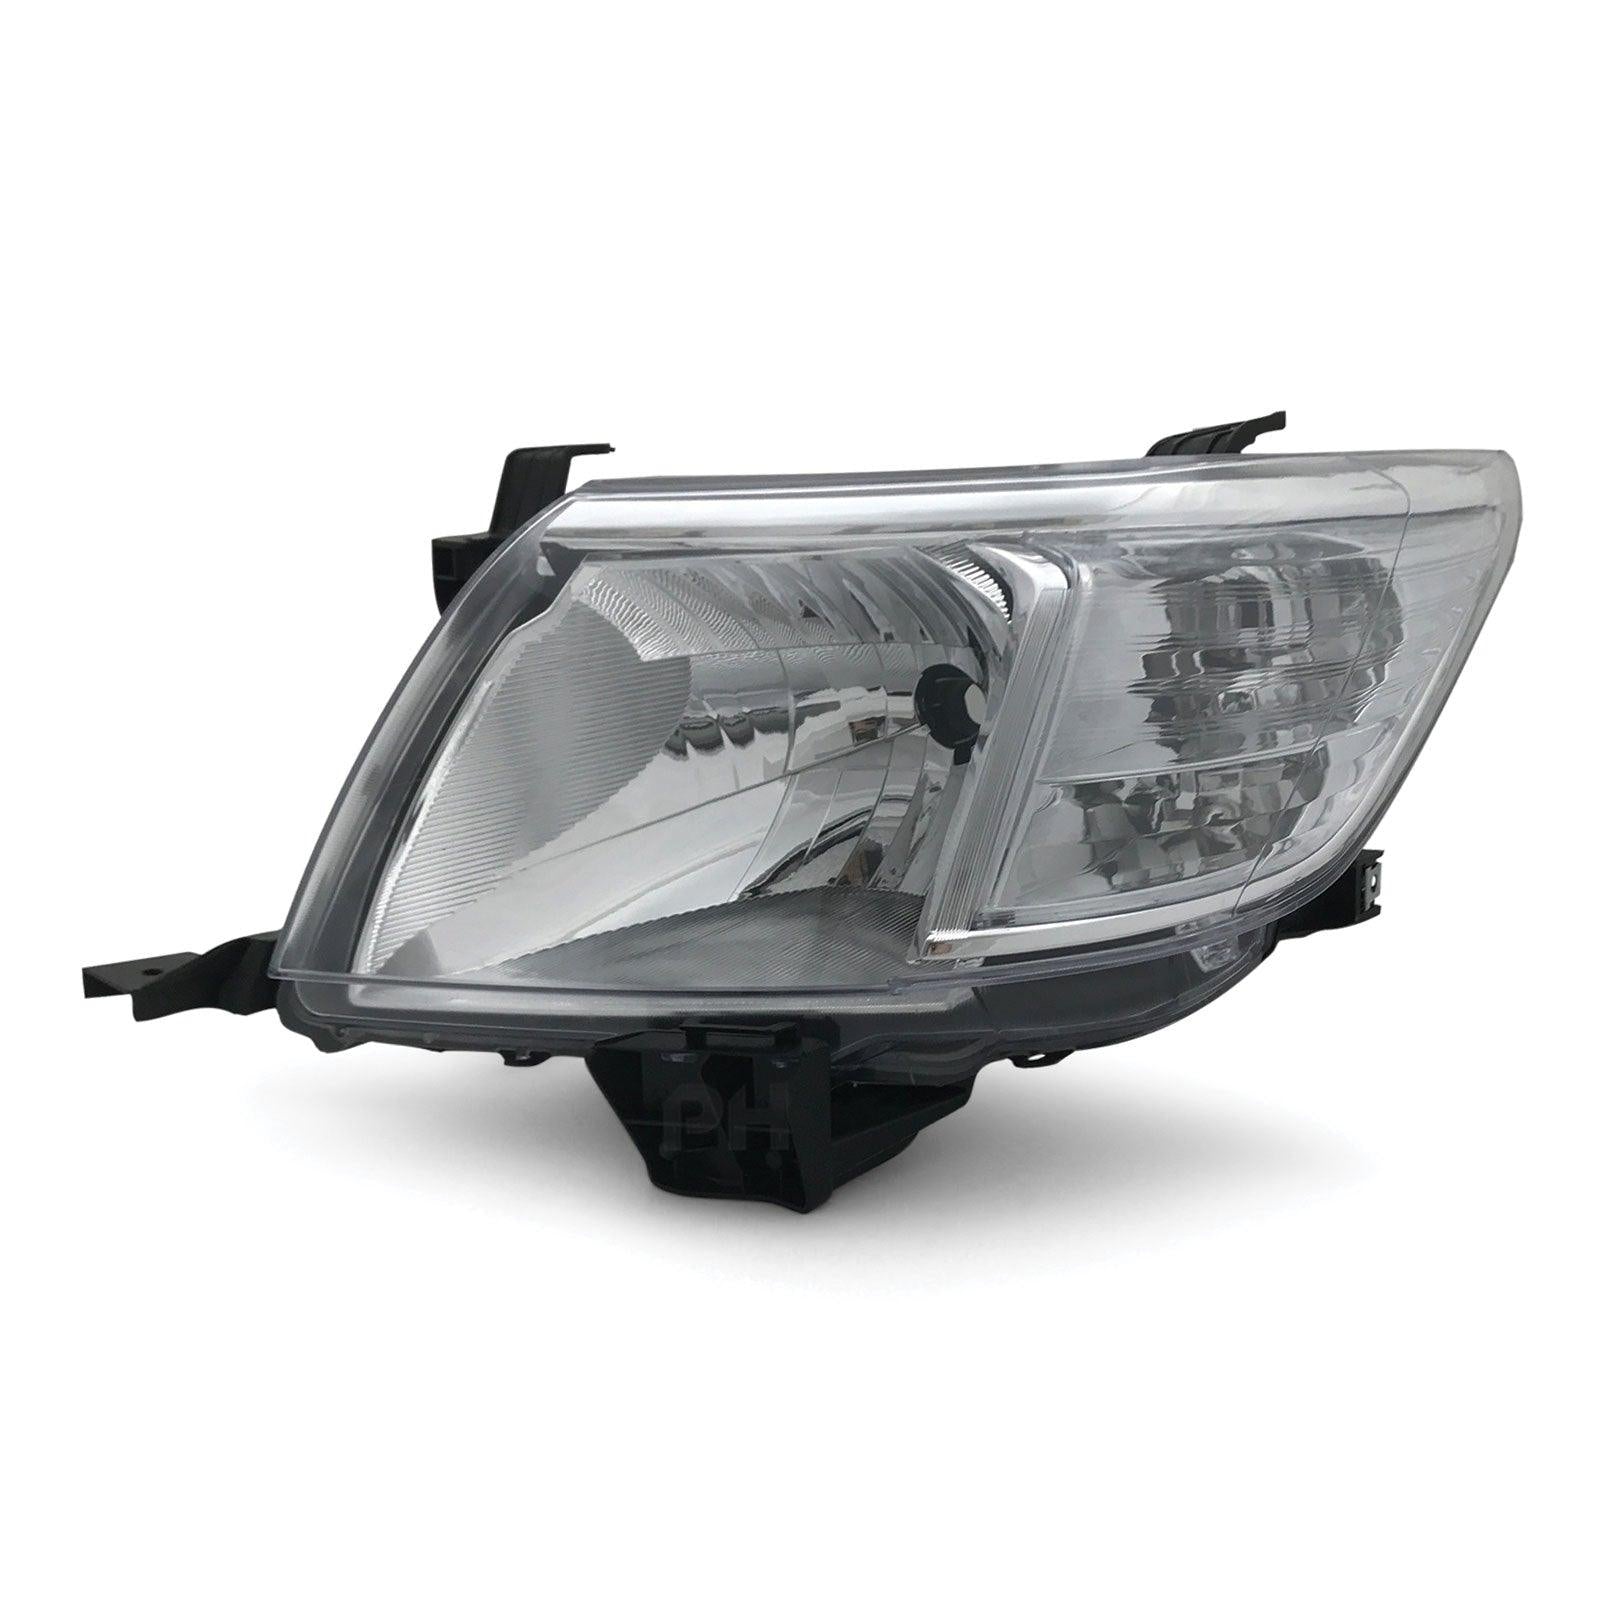 Panel House - Headlight LEFT Fits Toyota Hilux N70 2WD 4WD 06 - 2011 - 03 - 2015 LH - 4X4OC™ | 4x4 Offroad Centre